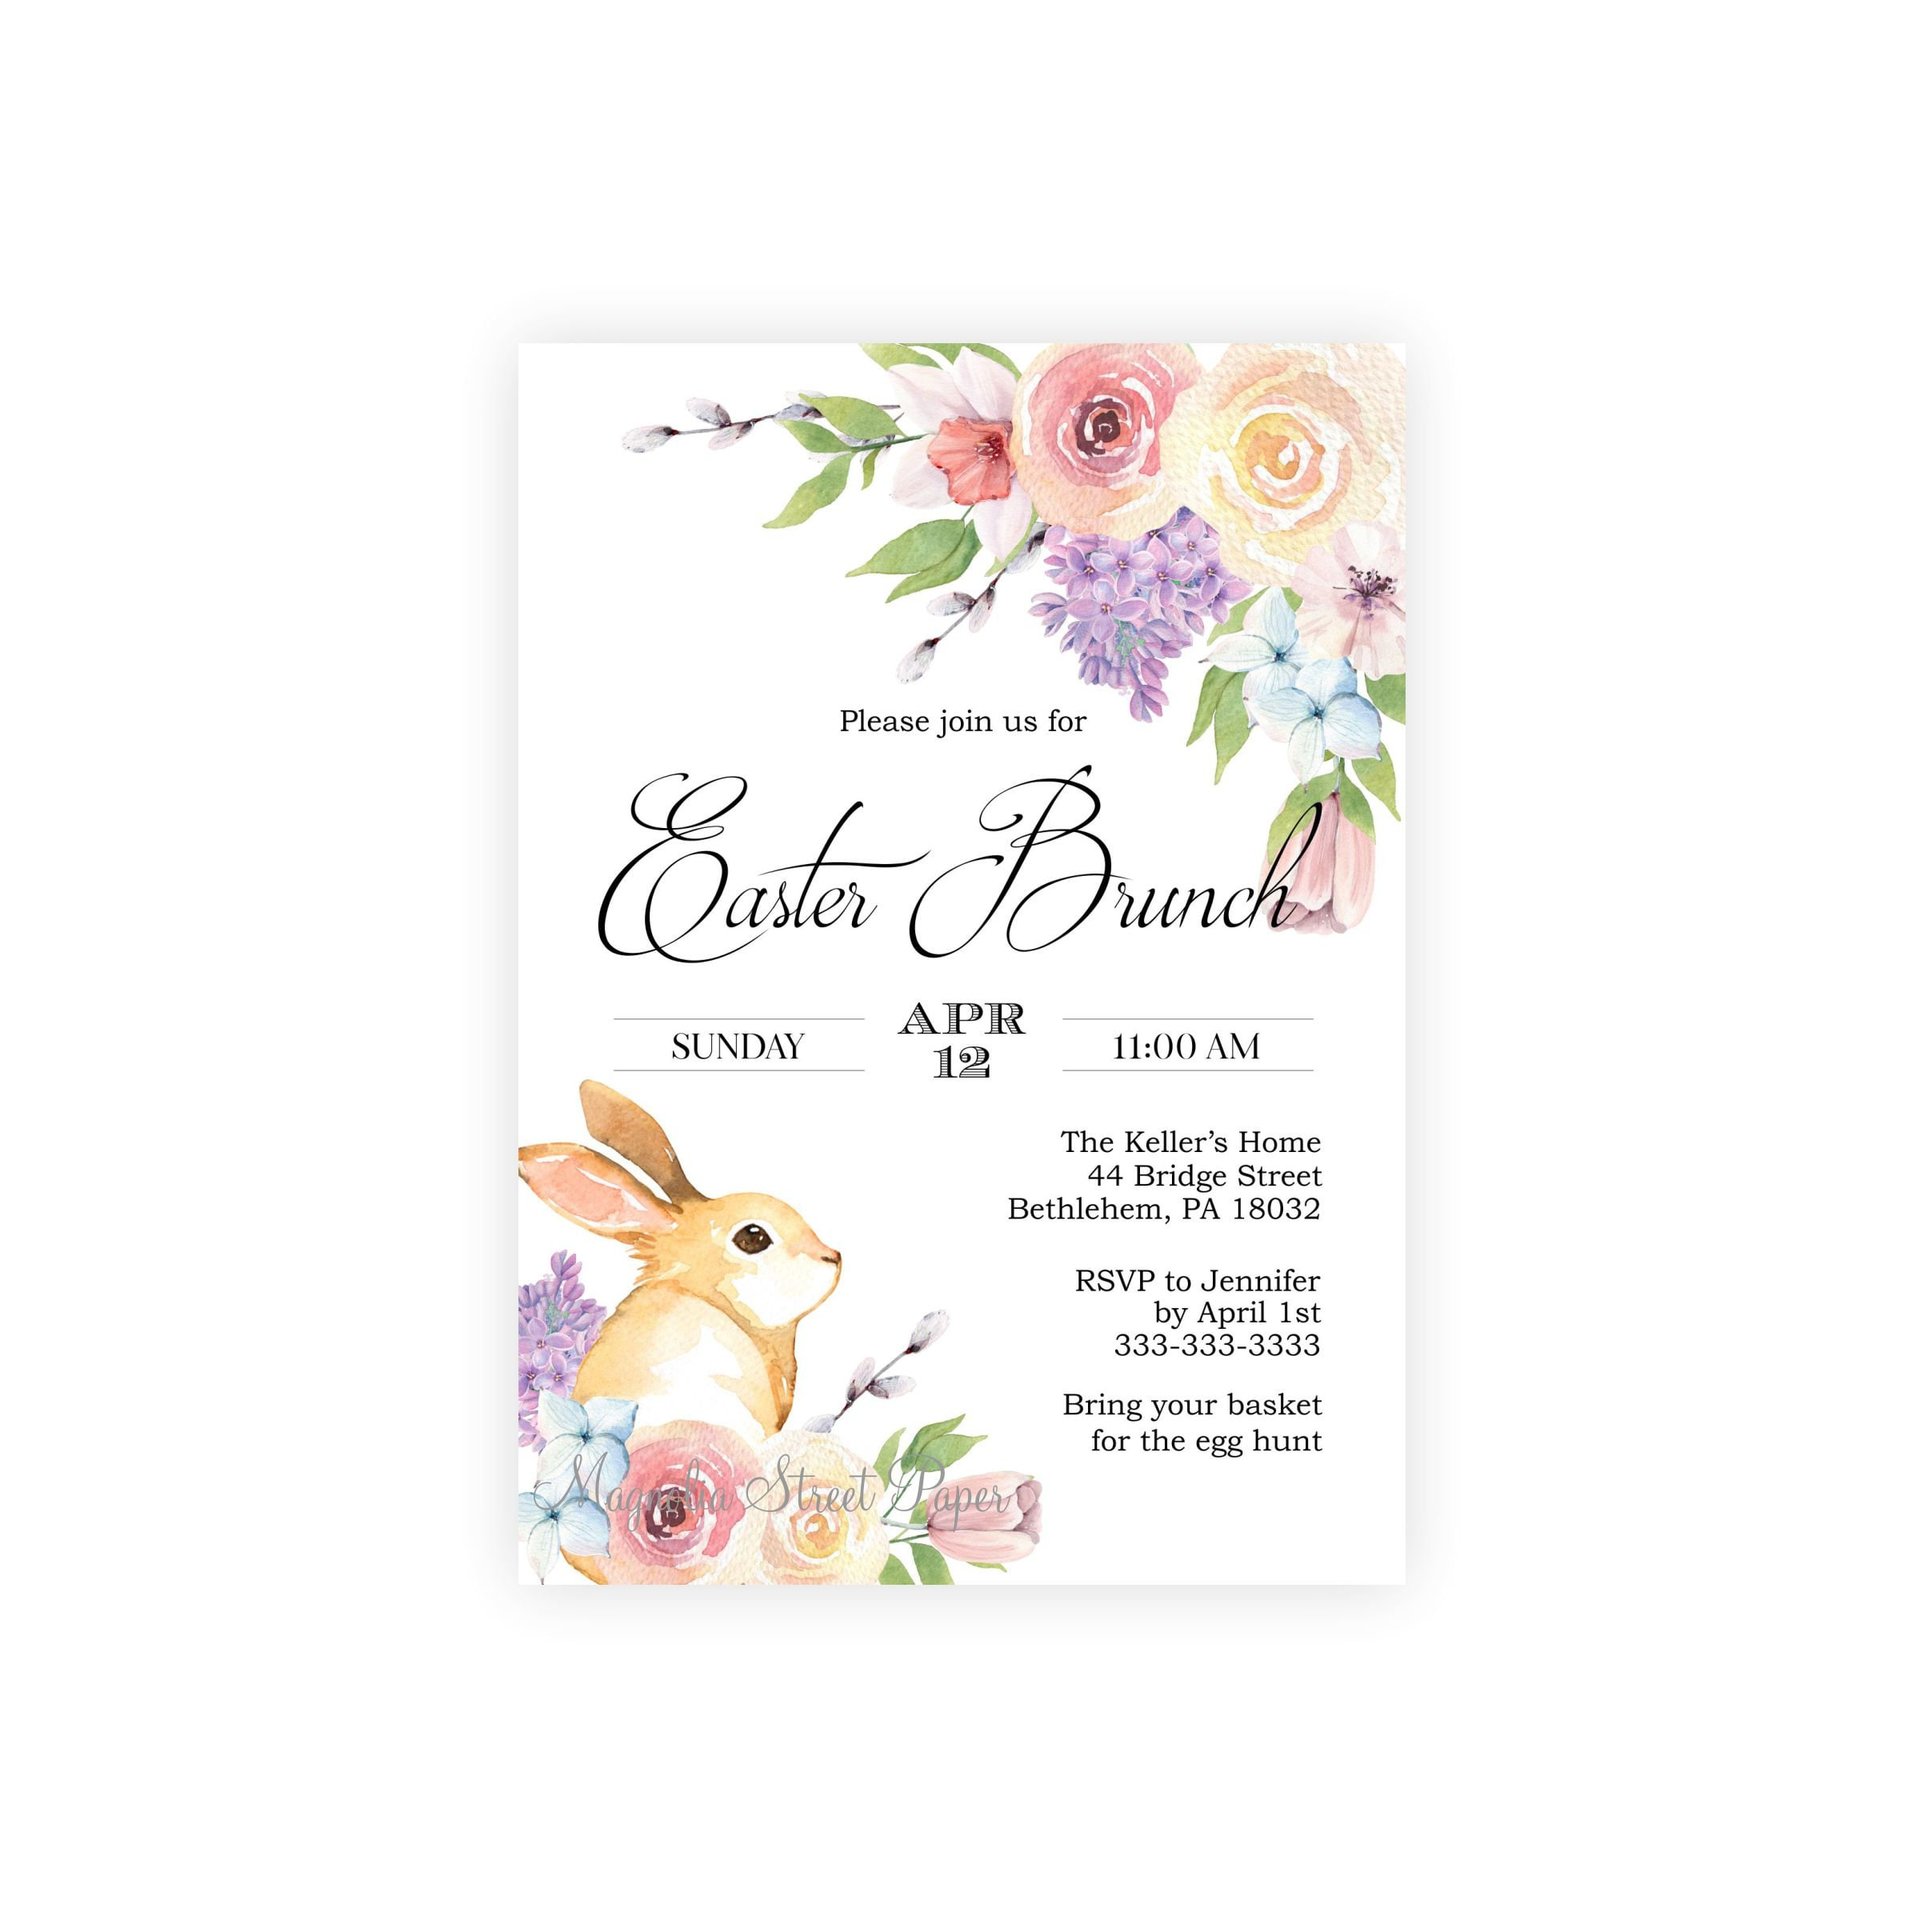 Floral Easter Brunch Invitation, Spring Flowers and Bunny